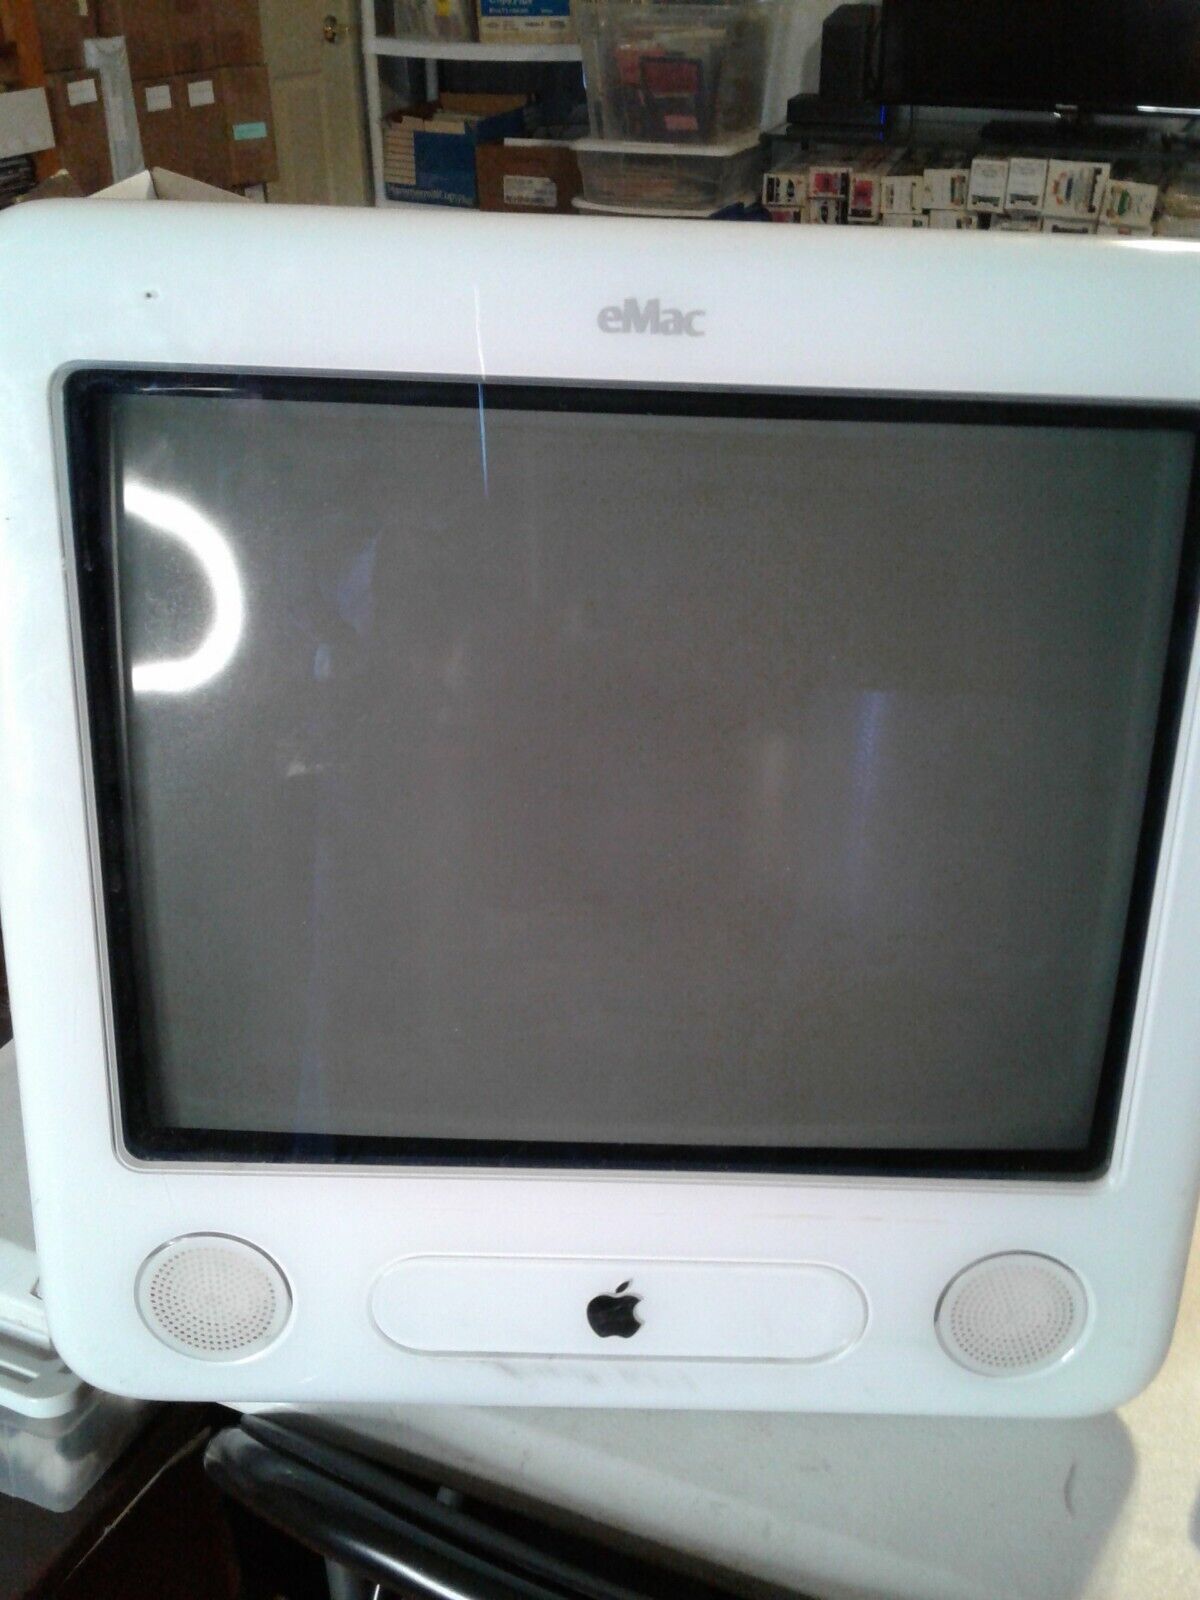 2003 APPLE EMAC COMPUTER/MONITOR/ALL IN 1. TURNS ON/OFF FAN & SPEAKERS WORK.